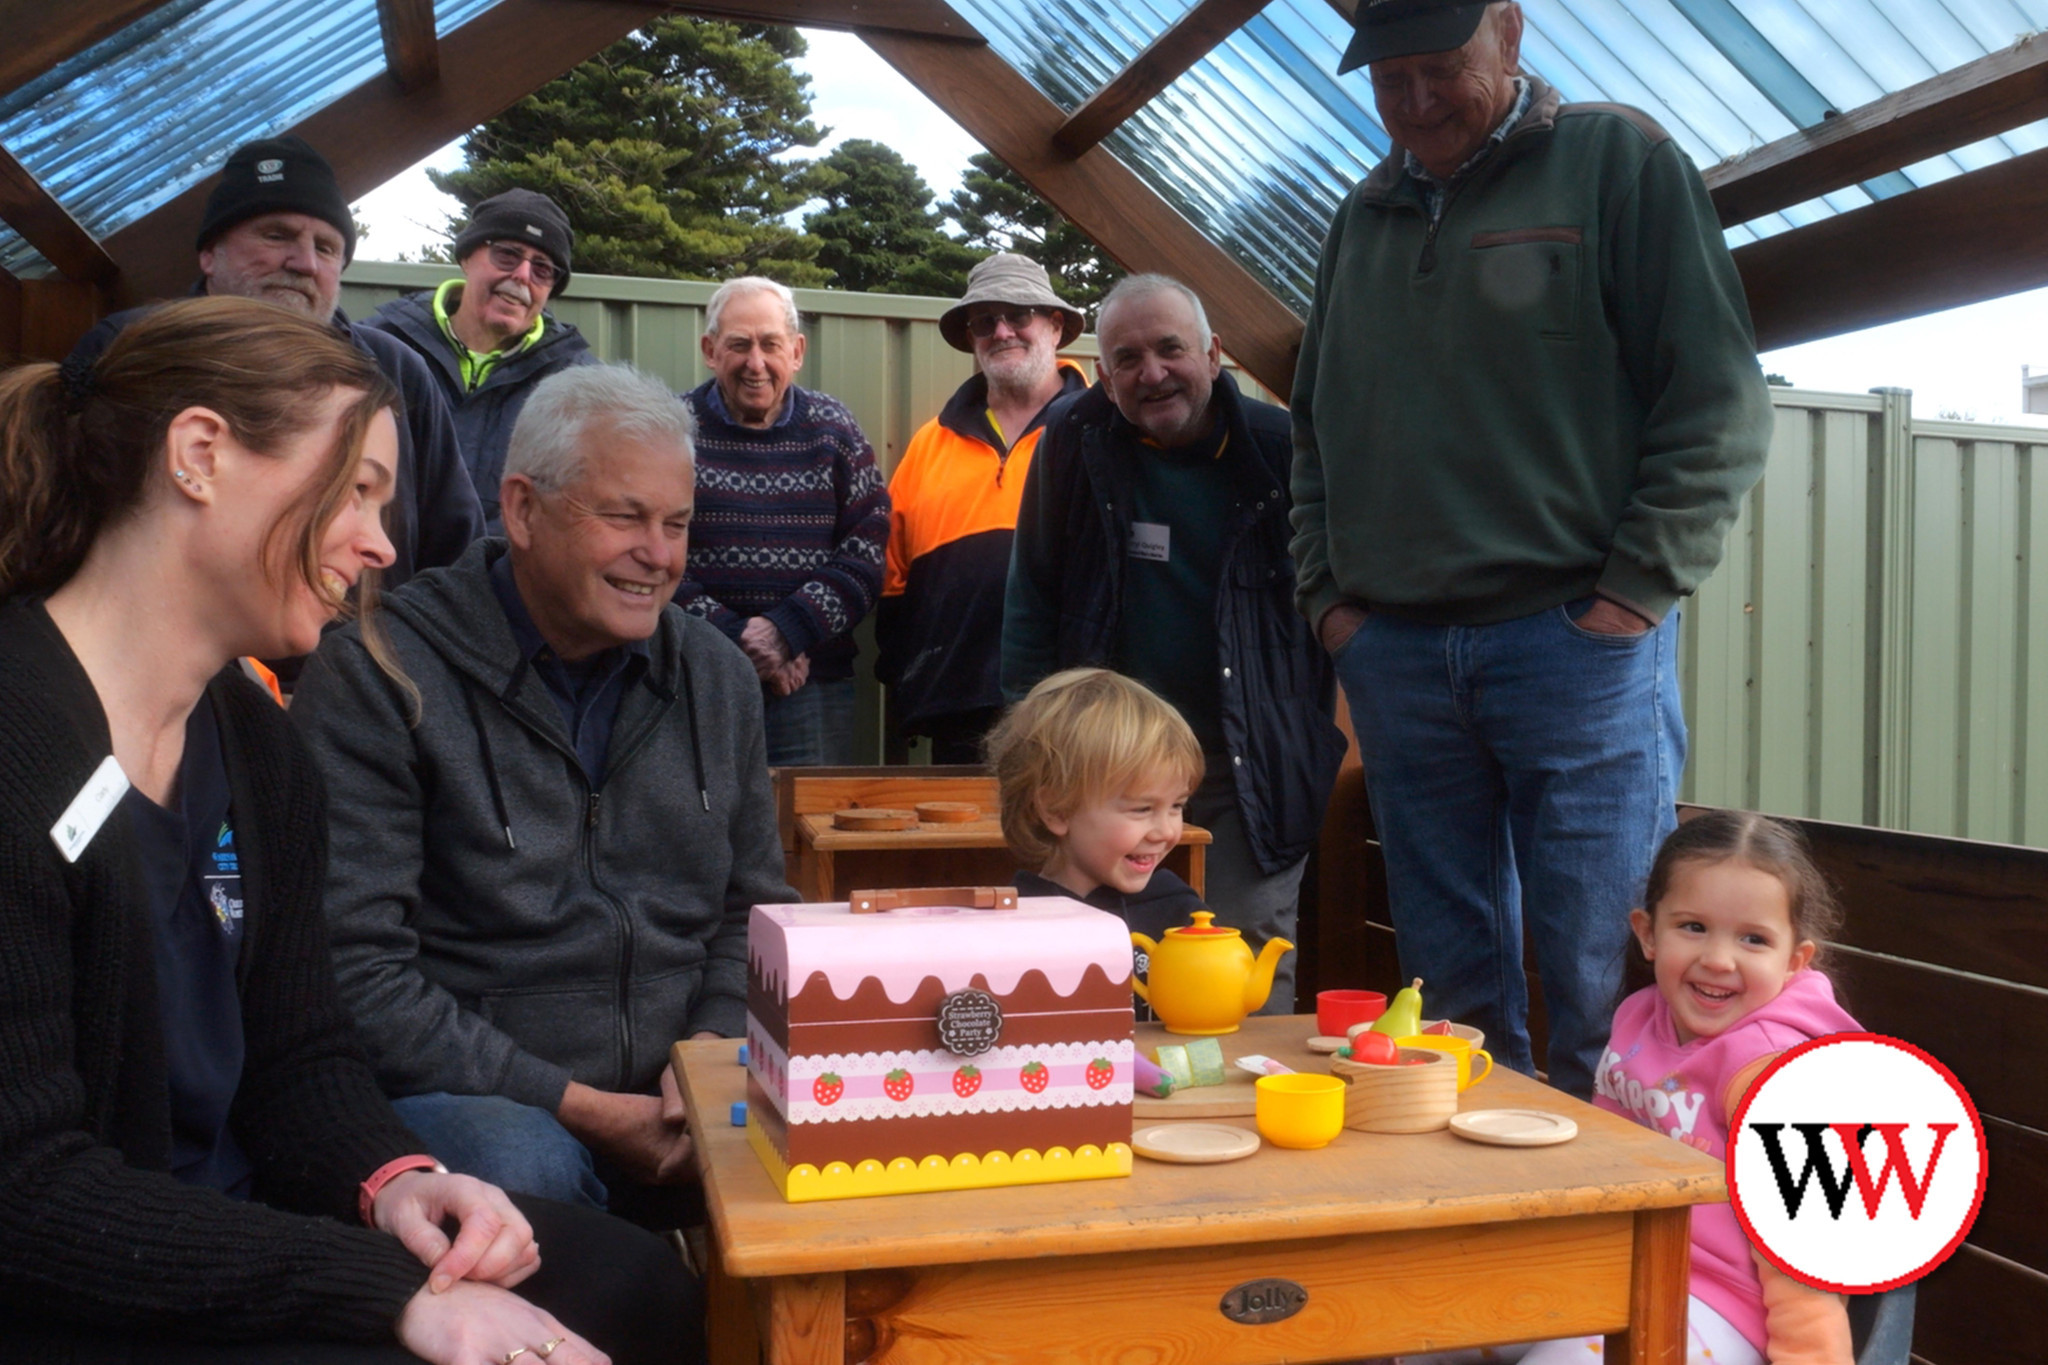 Remi McSween and Elana Young were thrilled to be able to play in the new cubby house, watched by members of the Warrnambool Men’s Shed.